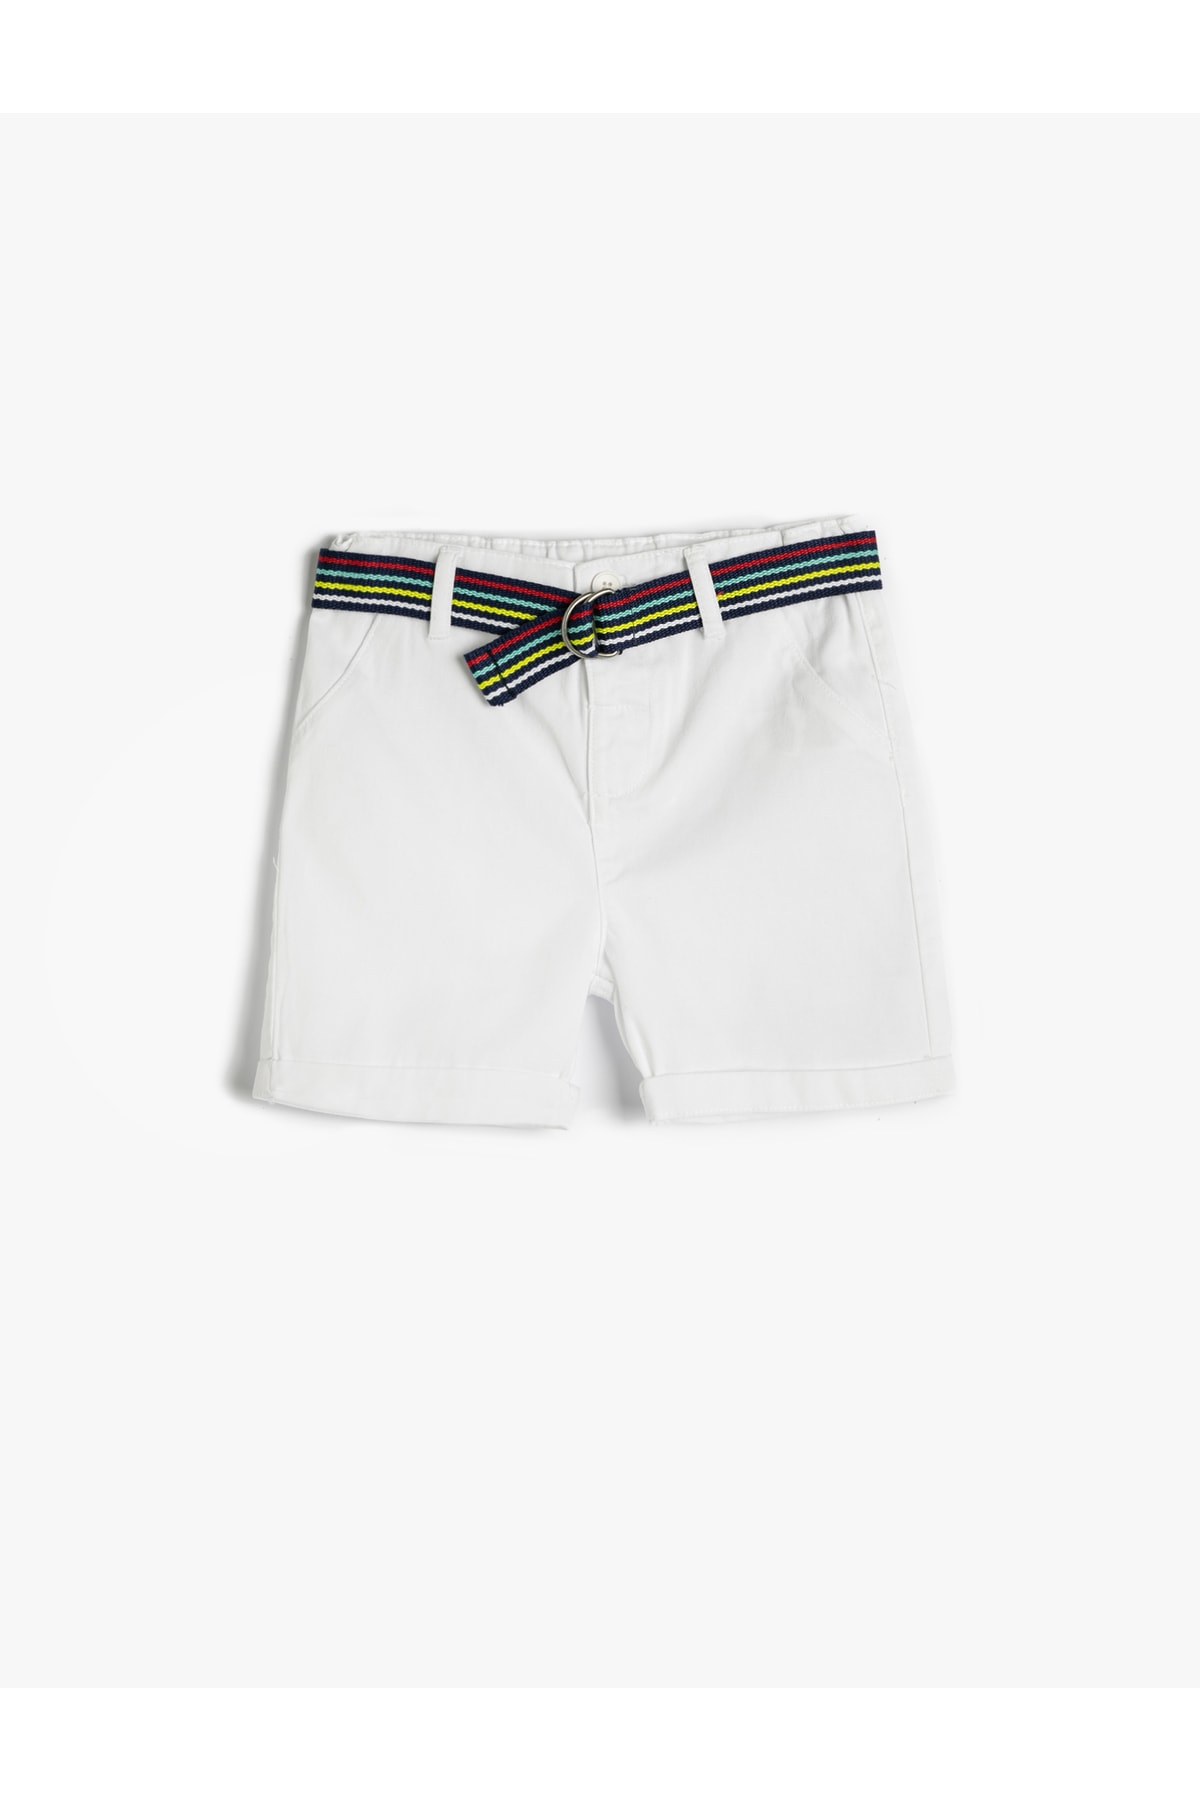 Koton Shorts With Belt Detailed Pockets, Cotton Cotton with Adjustable Elastic Waist.